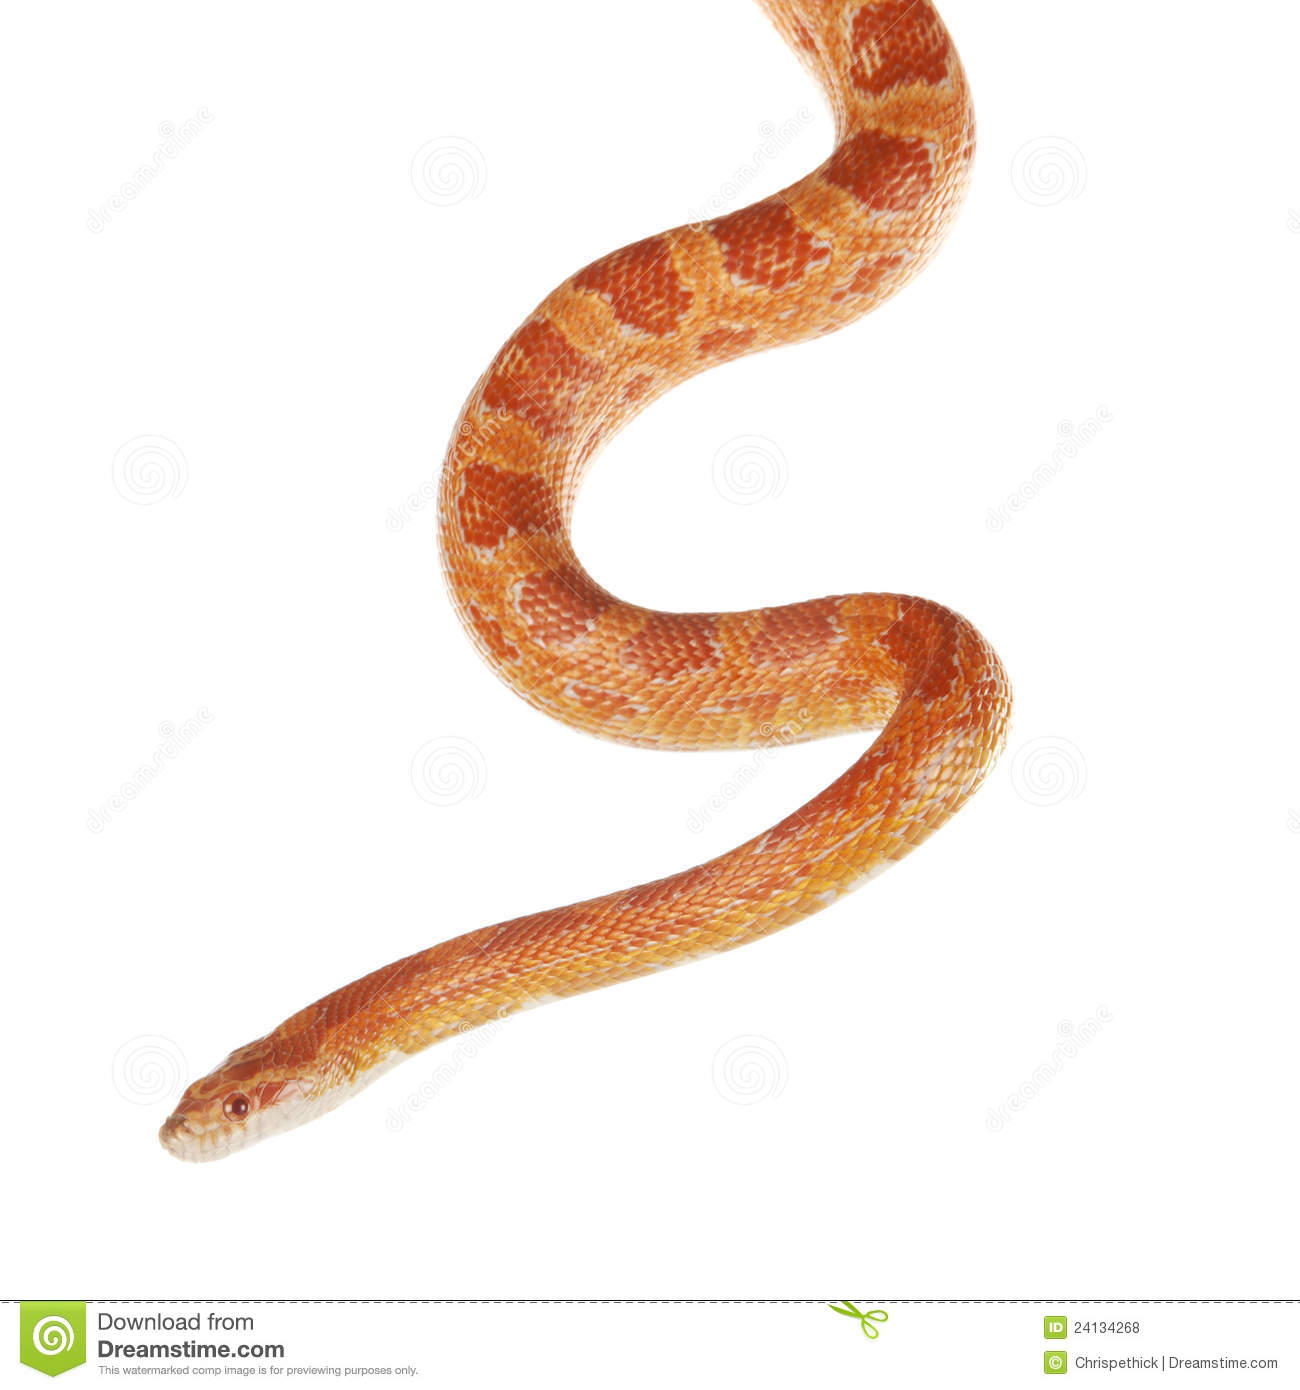 Corn Snake clipart #13, Download drawings